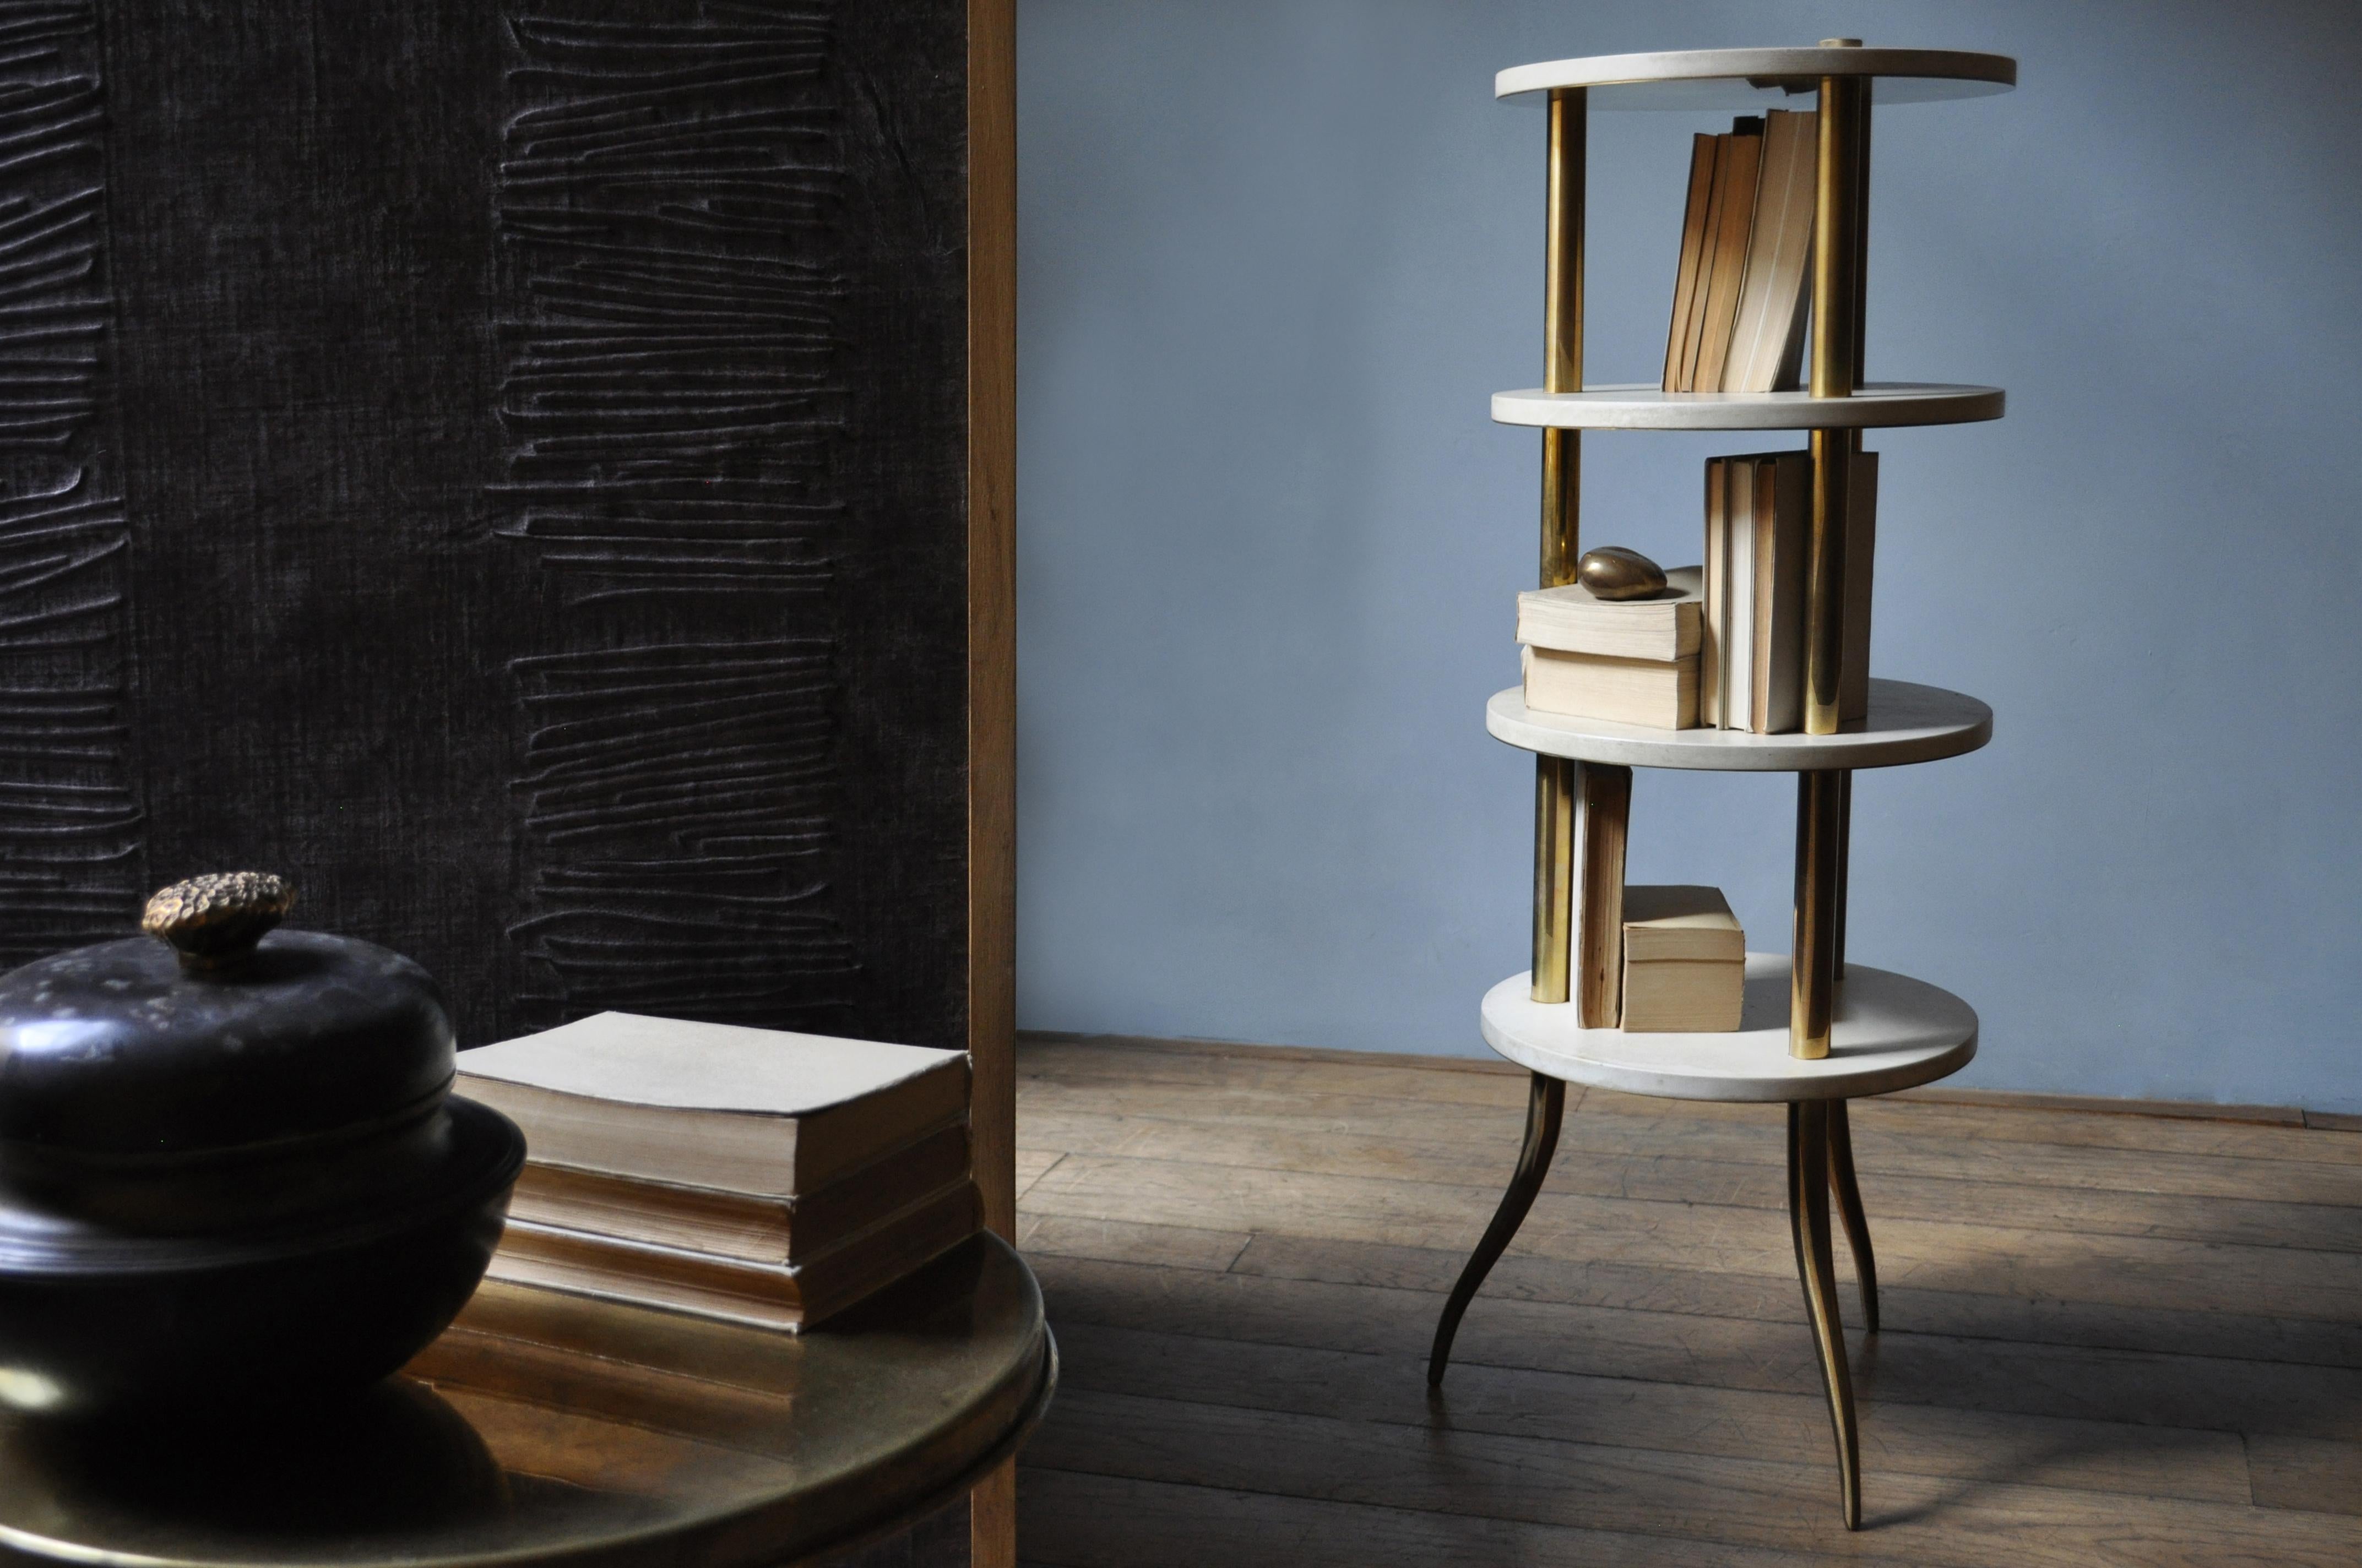 Distinguished for its essential shape, freefrom superfluous elements, this column bookcase is characterized by soft colors of parchment leather and shiny brass that give it a retro charm. The structure in brass is made up of three columns with